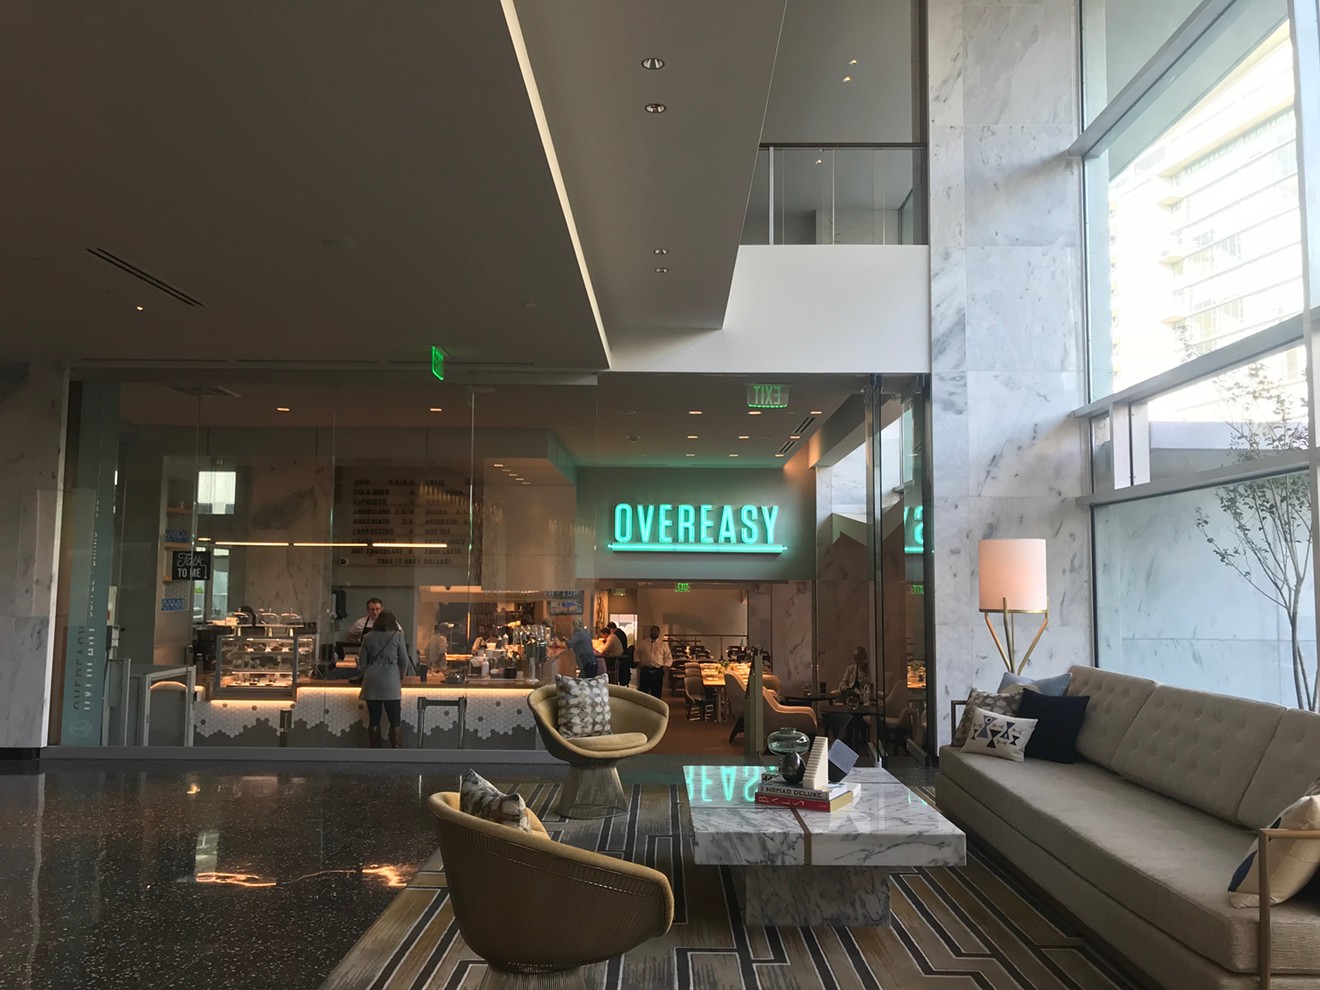 Step through the Statler's chic new lobby and you'll find yourself at Overeasy, a fun new breakfast, lunch and dinner spot.